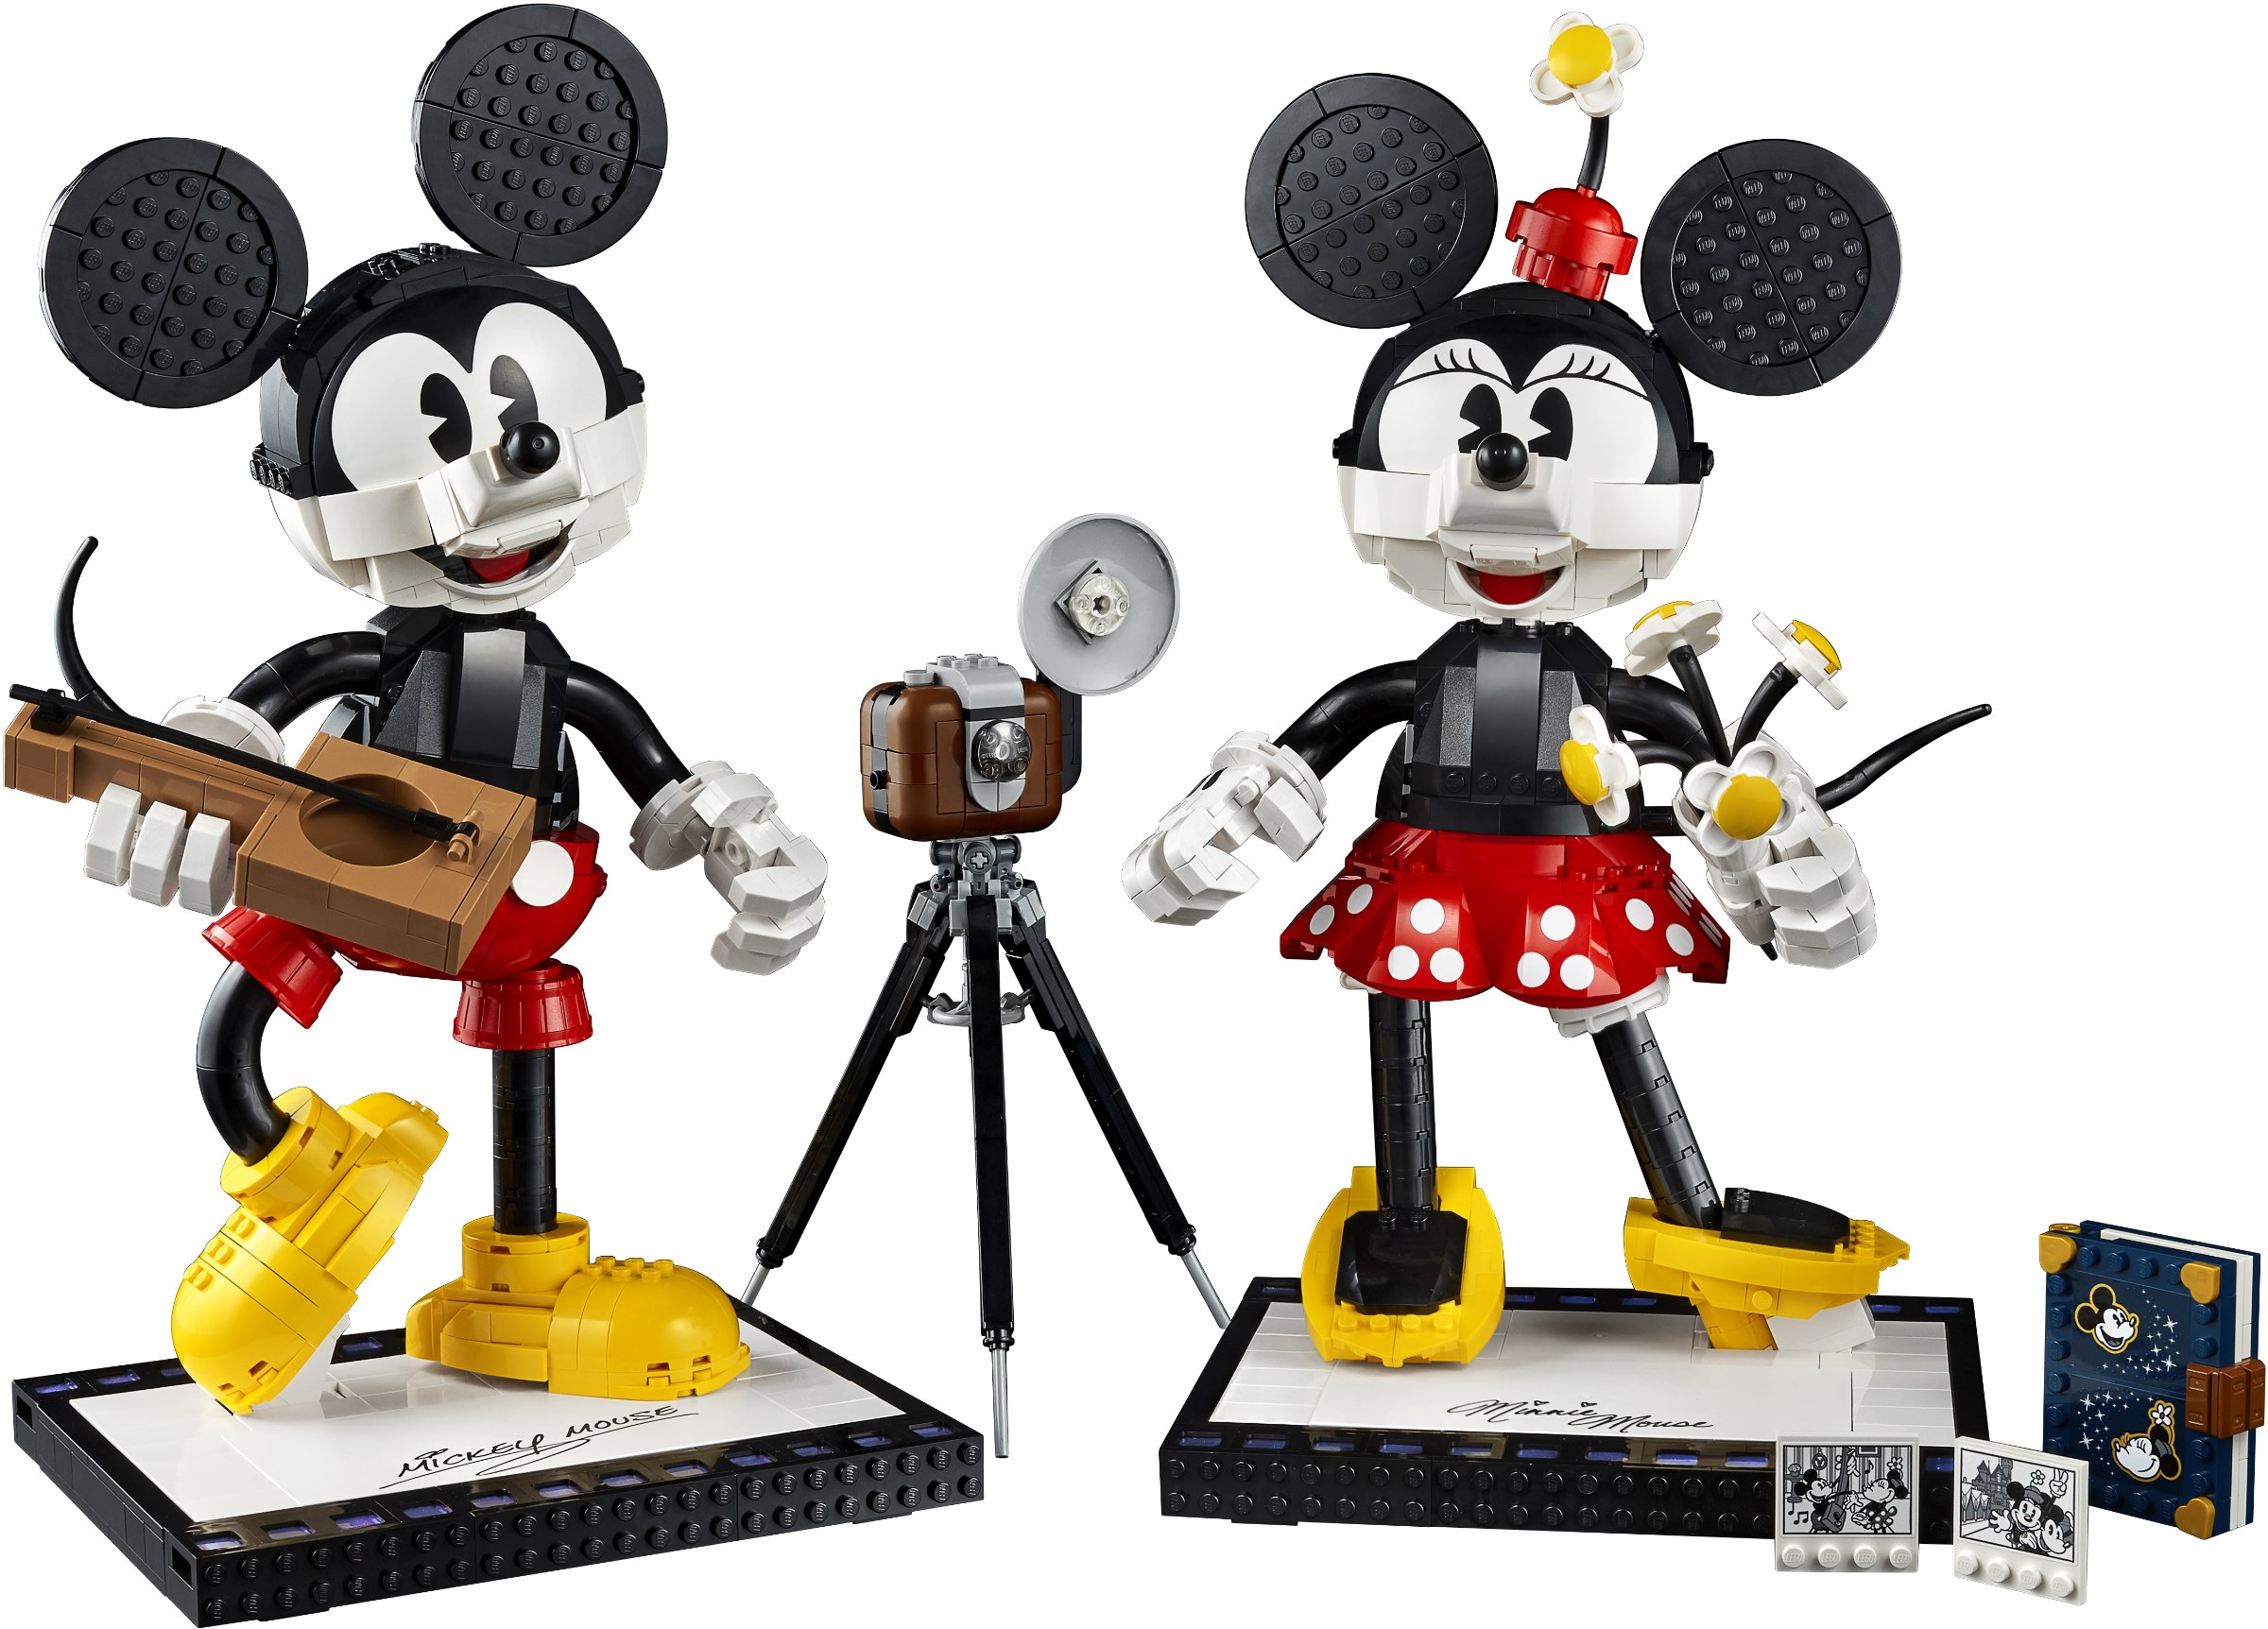 Minnie Mouse Projects  Photos, videos, logos, illustrations and